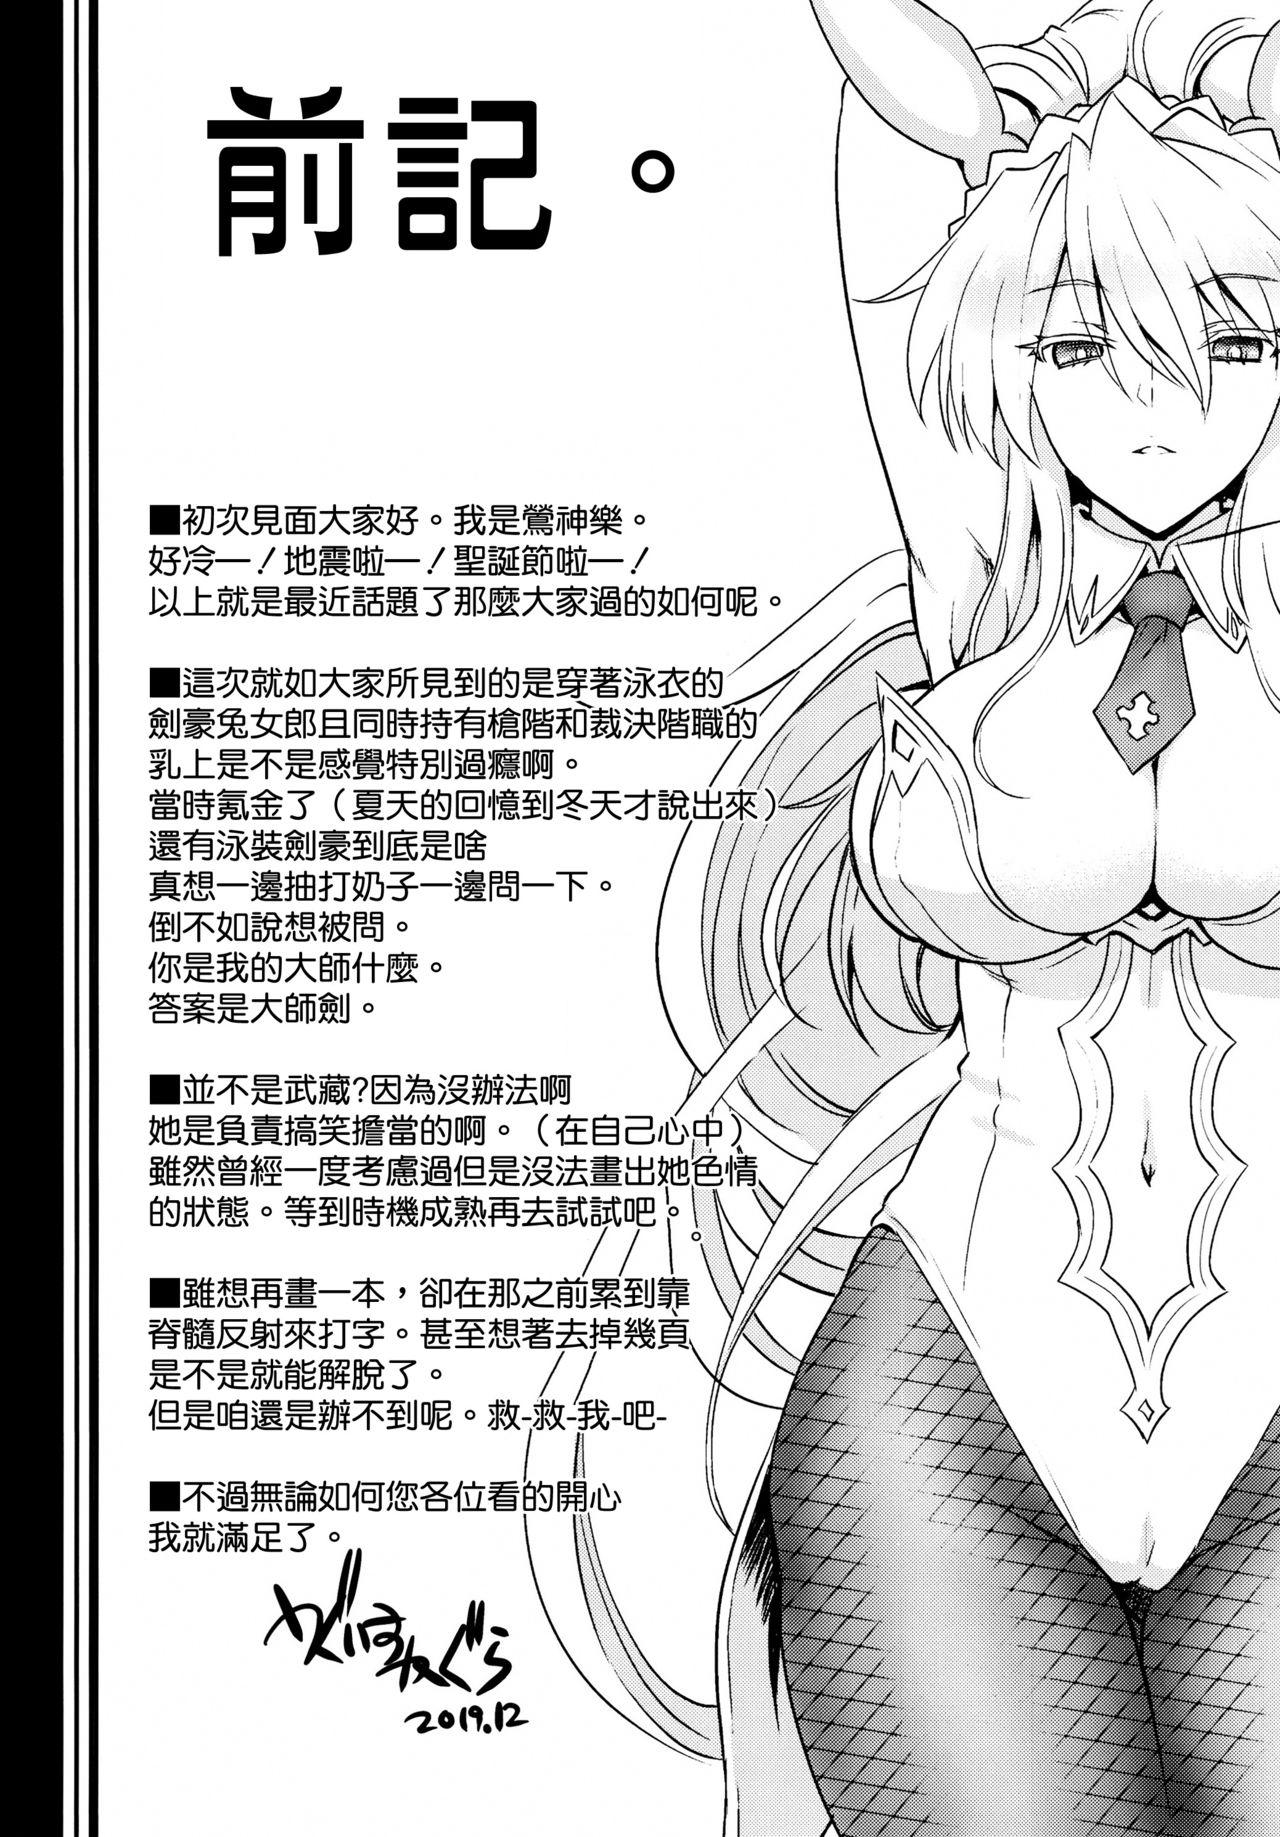 Husband Place your bets please - Fate grand order Pigtails - Page 4